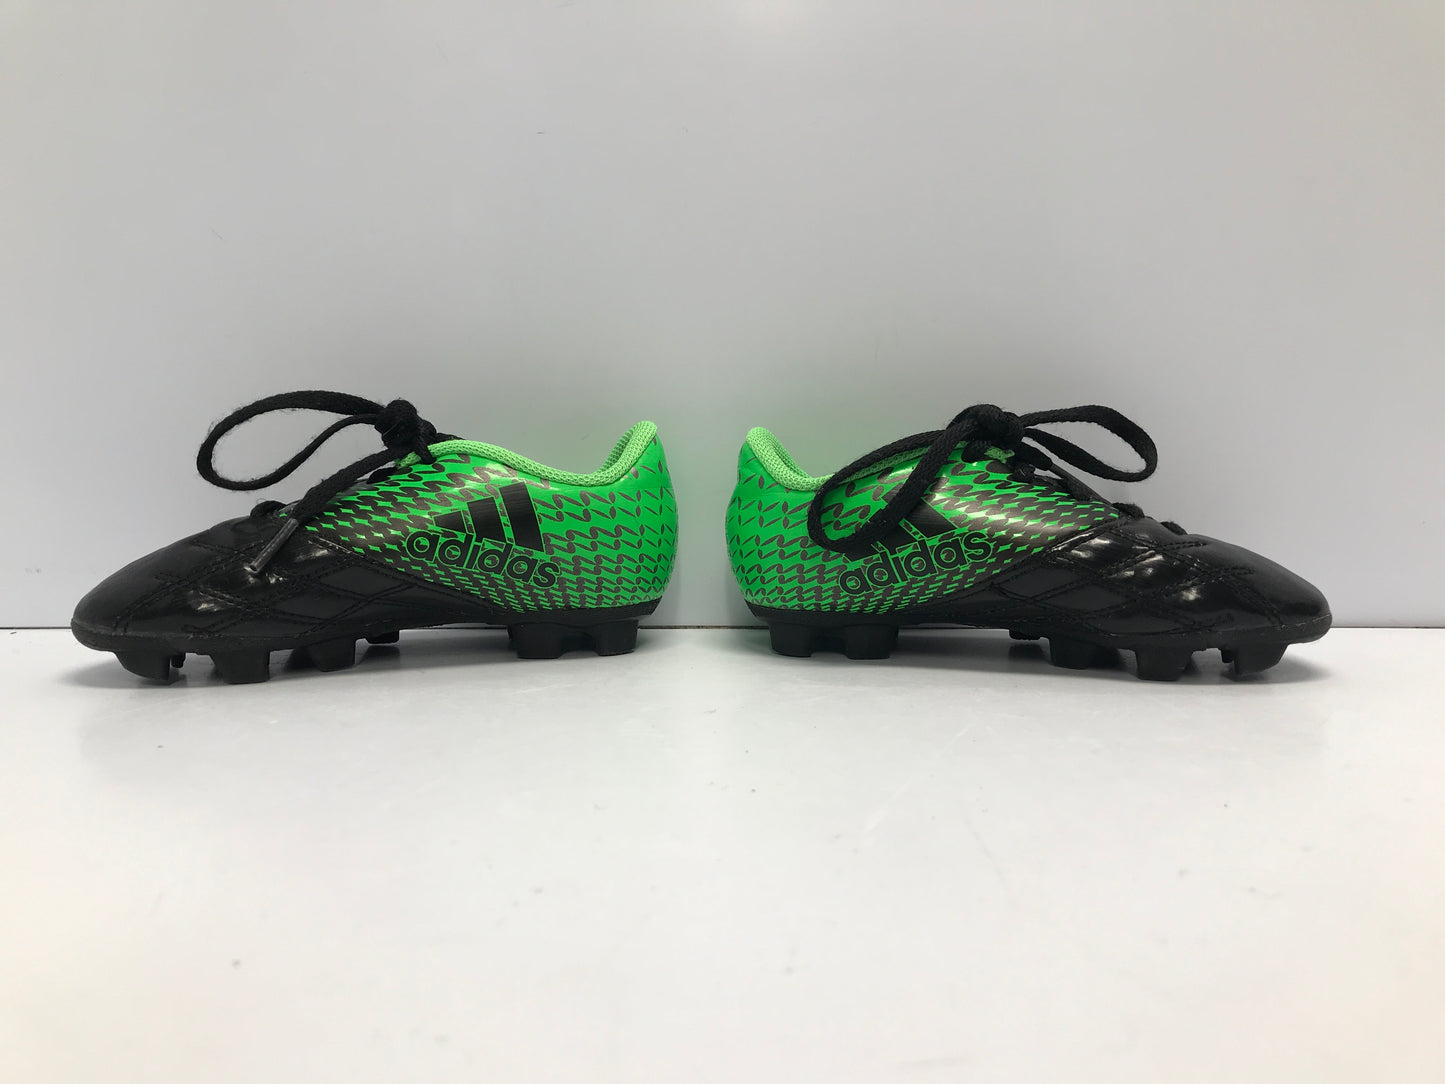 Soccer Shoes Cleats Child Size 11 Adidas Green Black Excellent